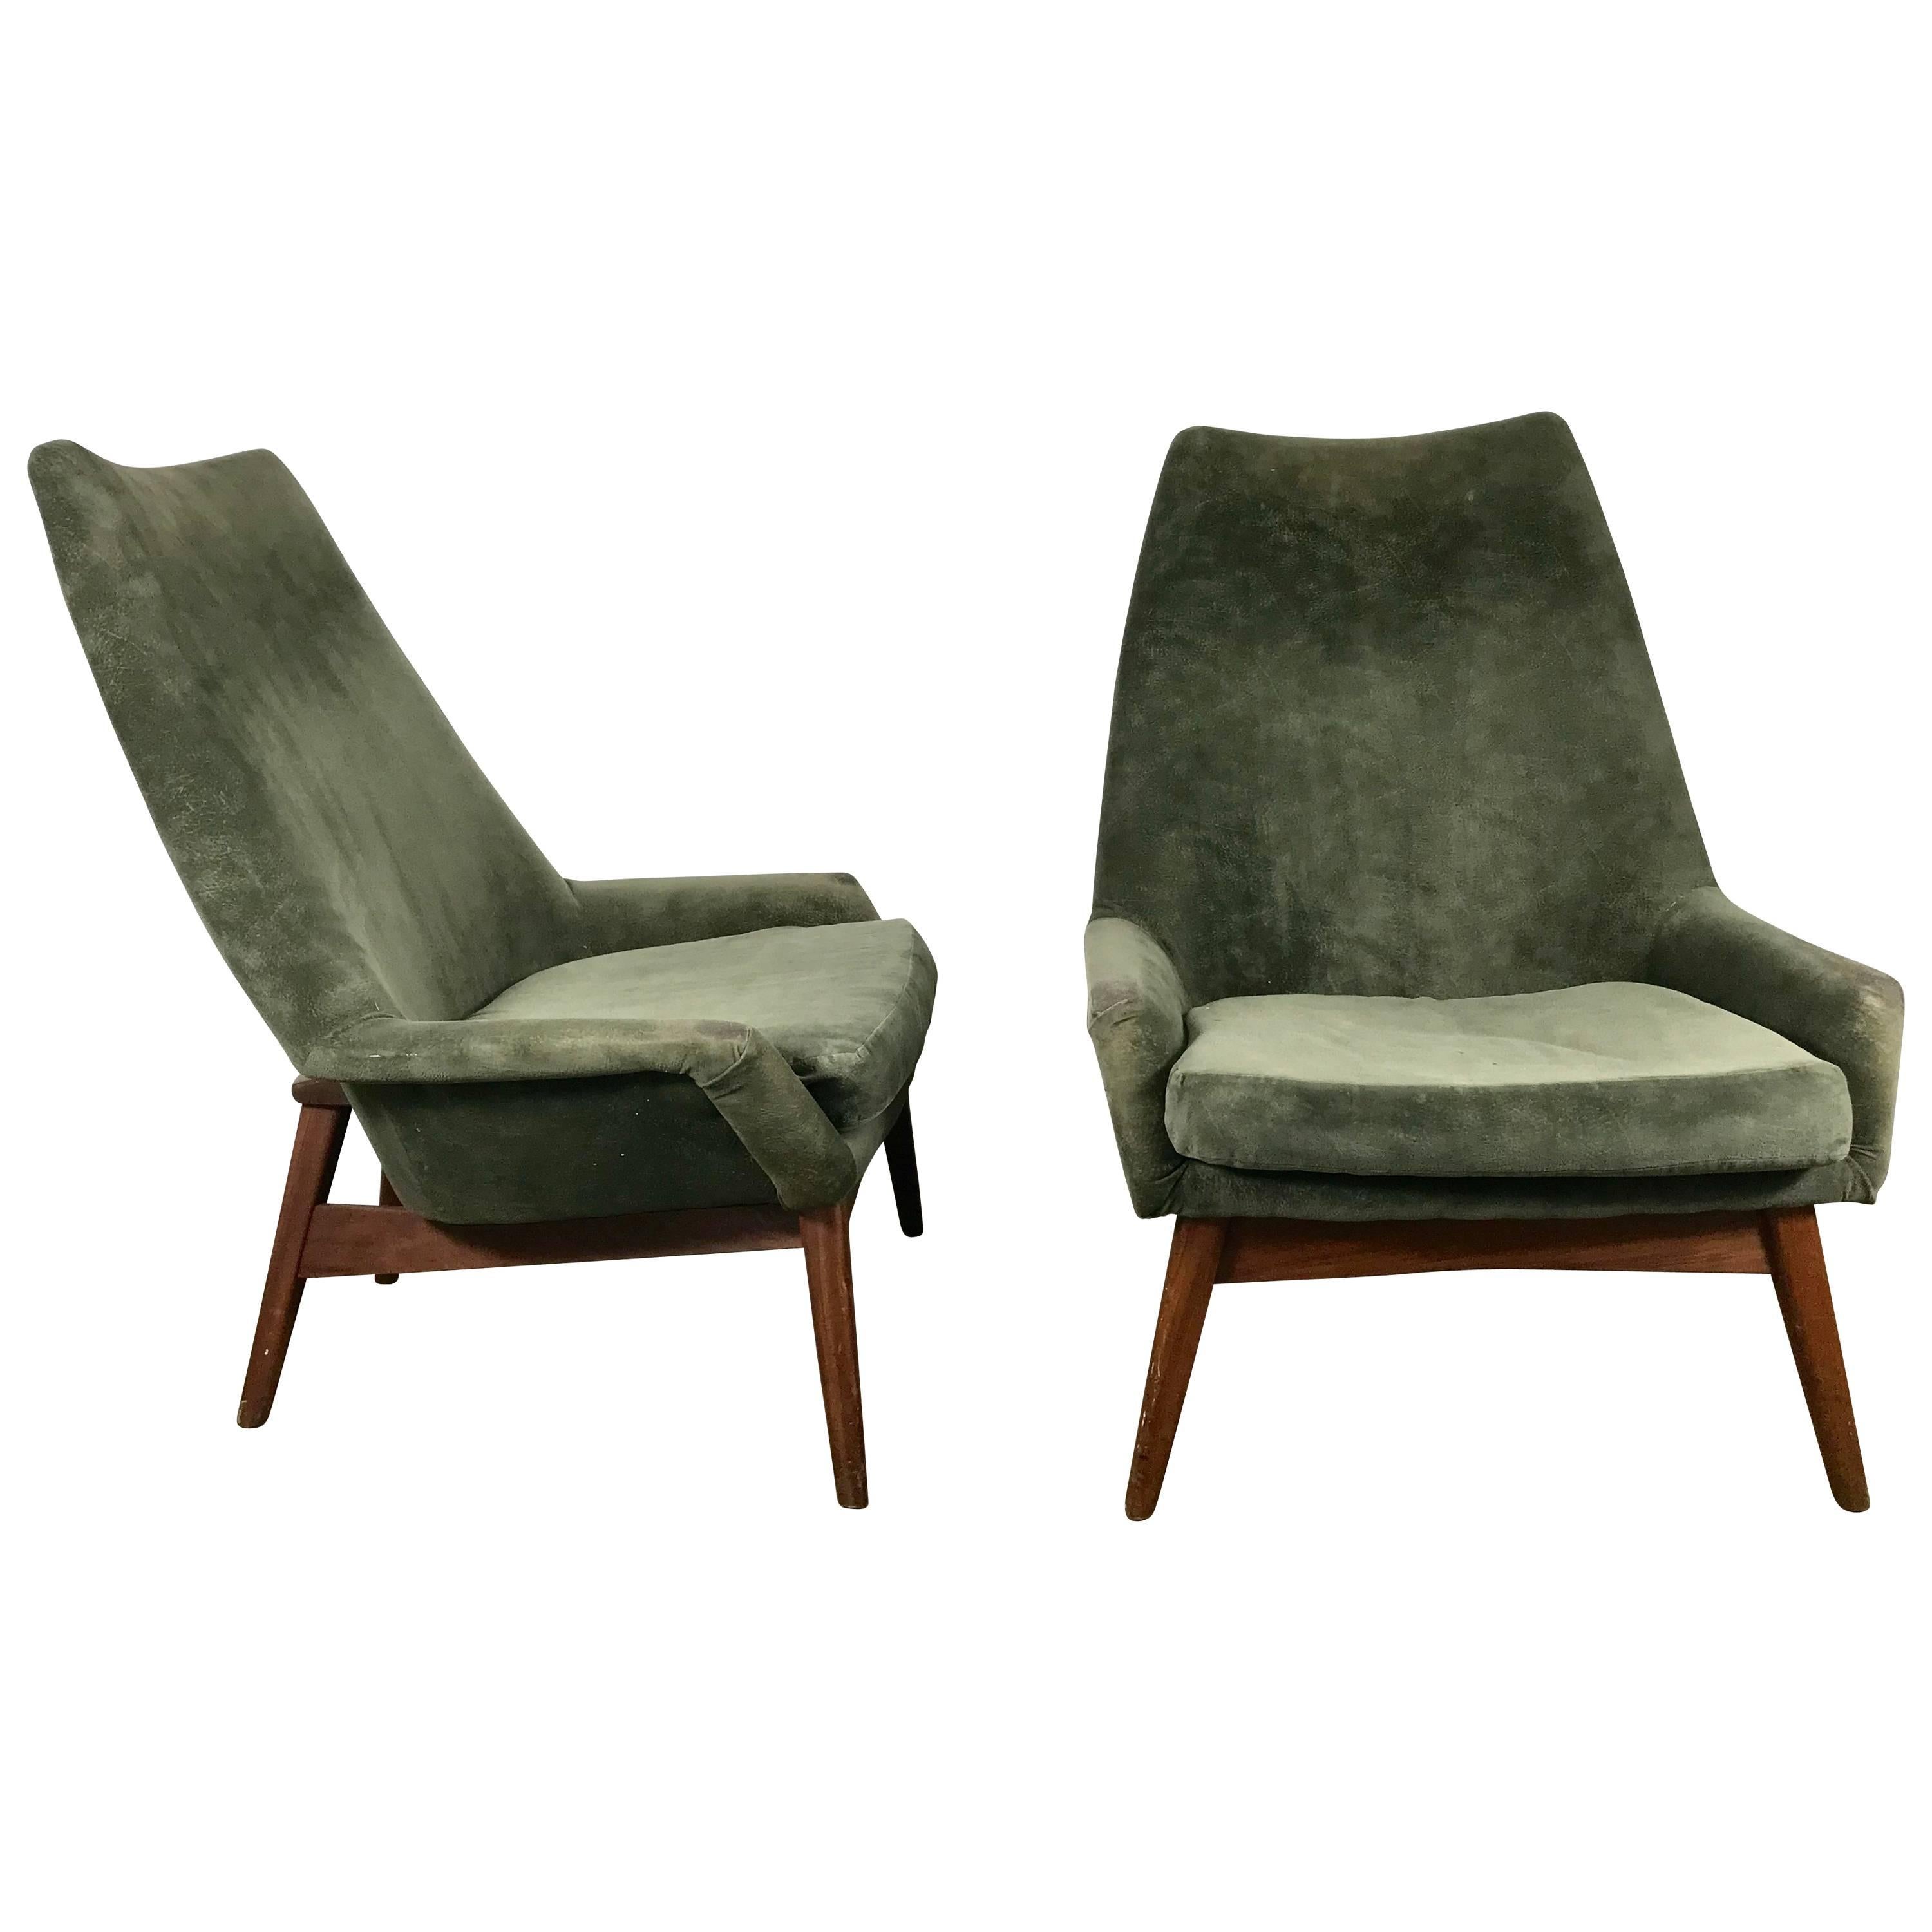 Pair of Mid-Century Modern Lounge Chairs by Jan Kuypers